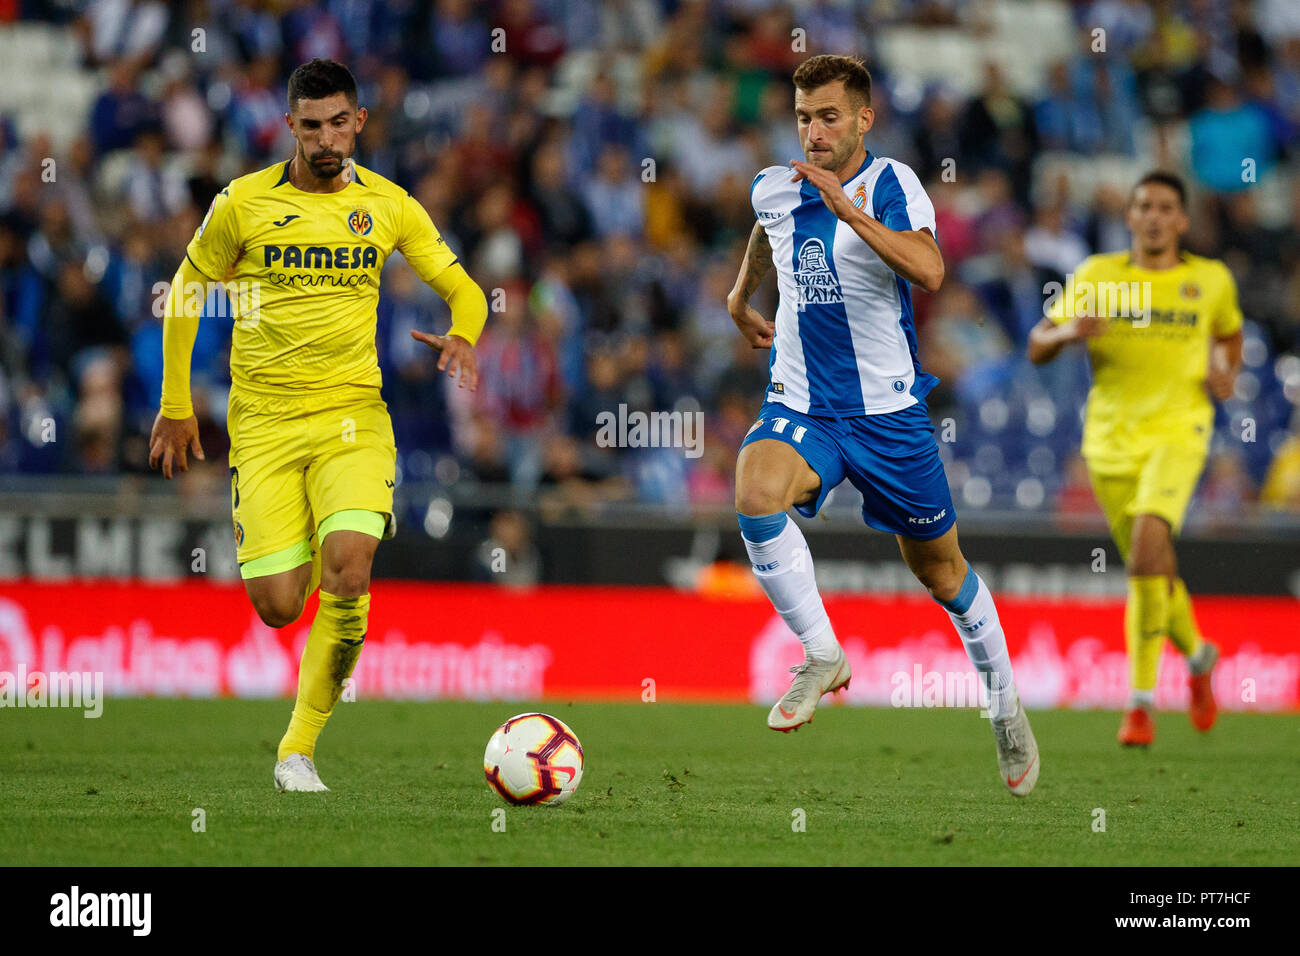 Barcelona, Spain. 7th Oct 2018. Leo Baptistao, player of RCD Espanyol in action with Alvaro Gonzalez, player of Villarreal CF during the 2018/2019 LaLiga Santander Round 8 game between RCD Espanyol and Villarreal CF at RCD Stadium on October 7, 2018 in Barcelona, Spain. Credit: UKKO Images/Alamy Live News Stock Photo